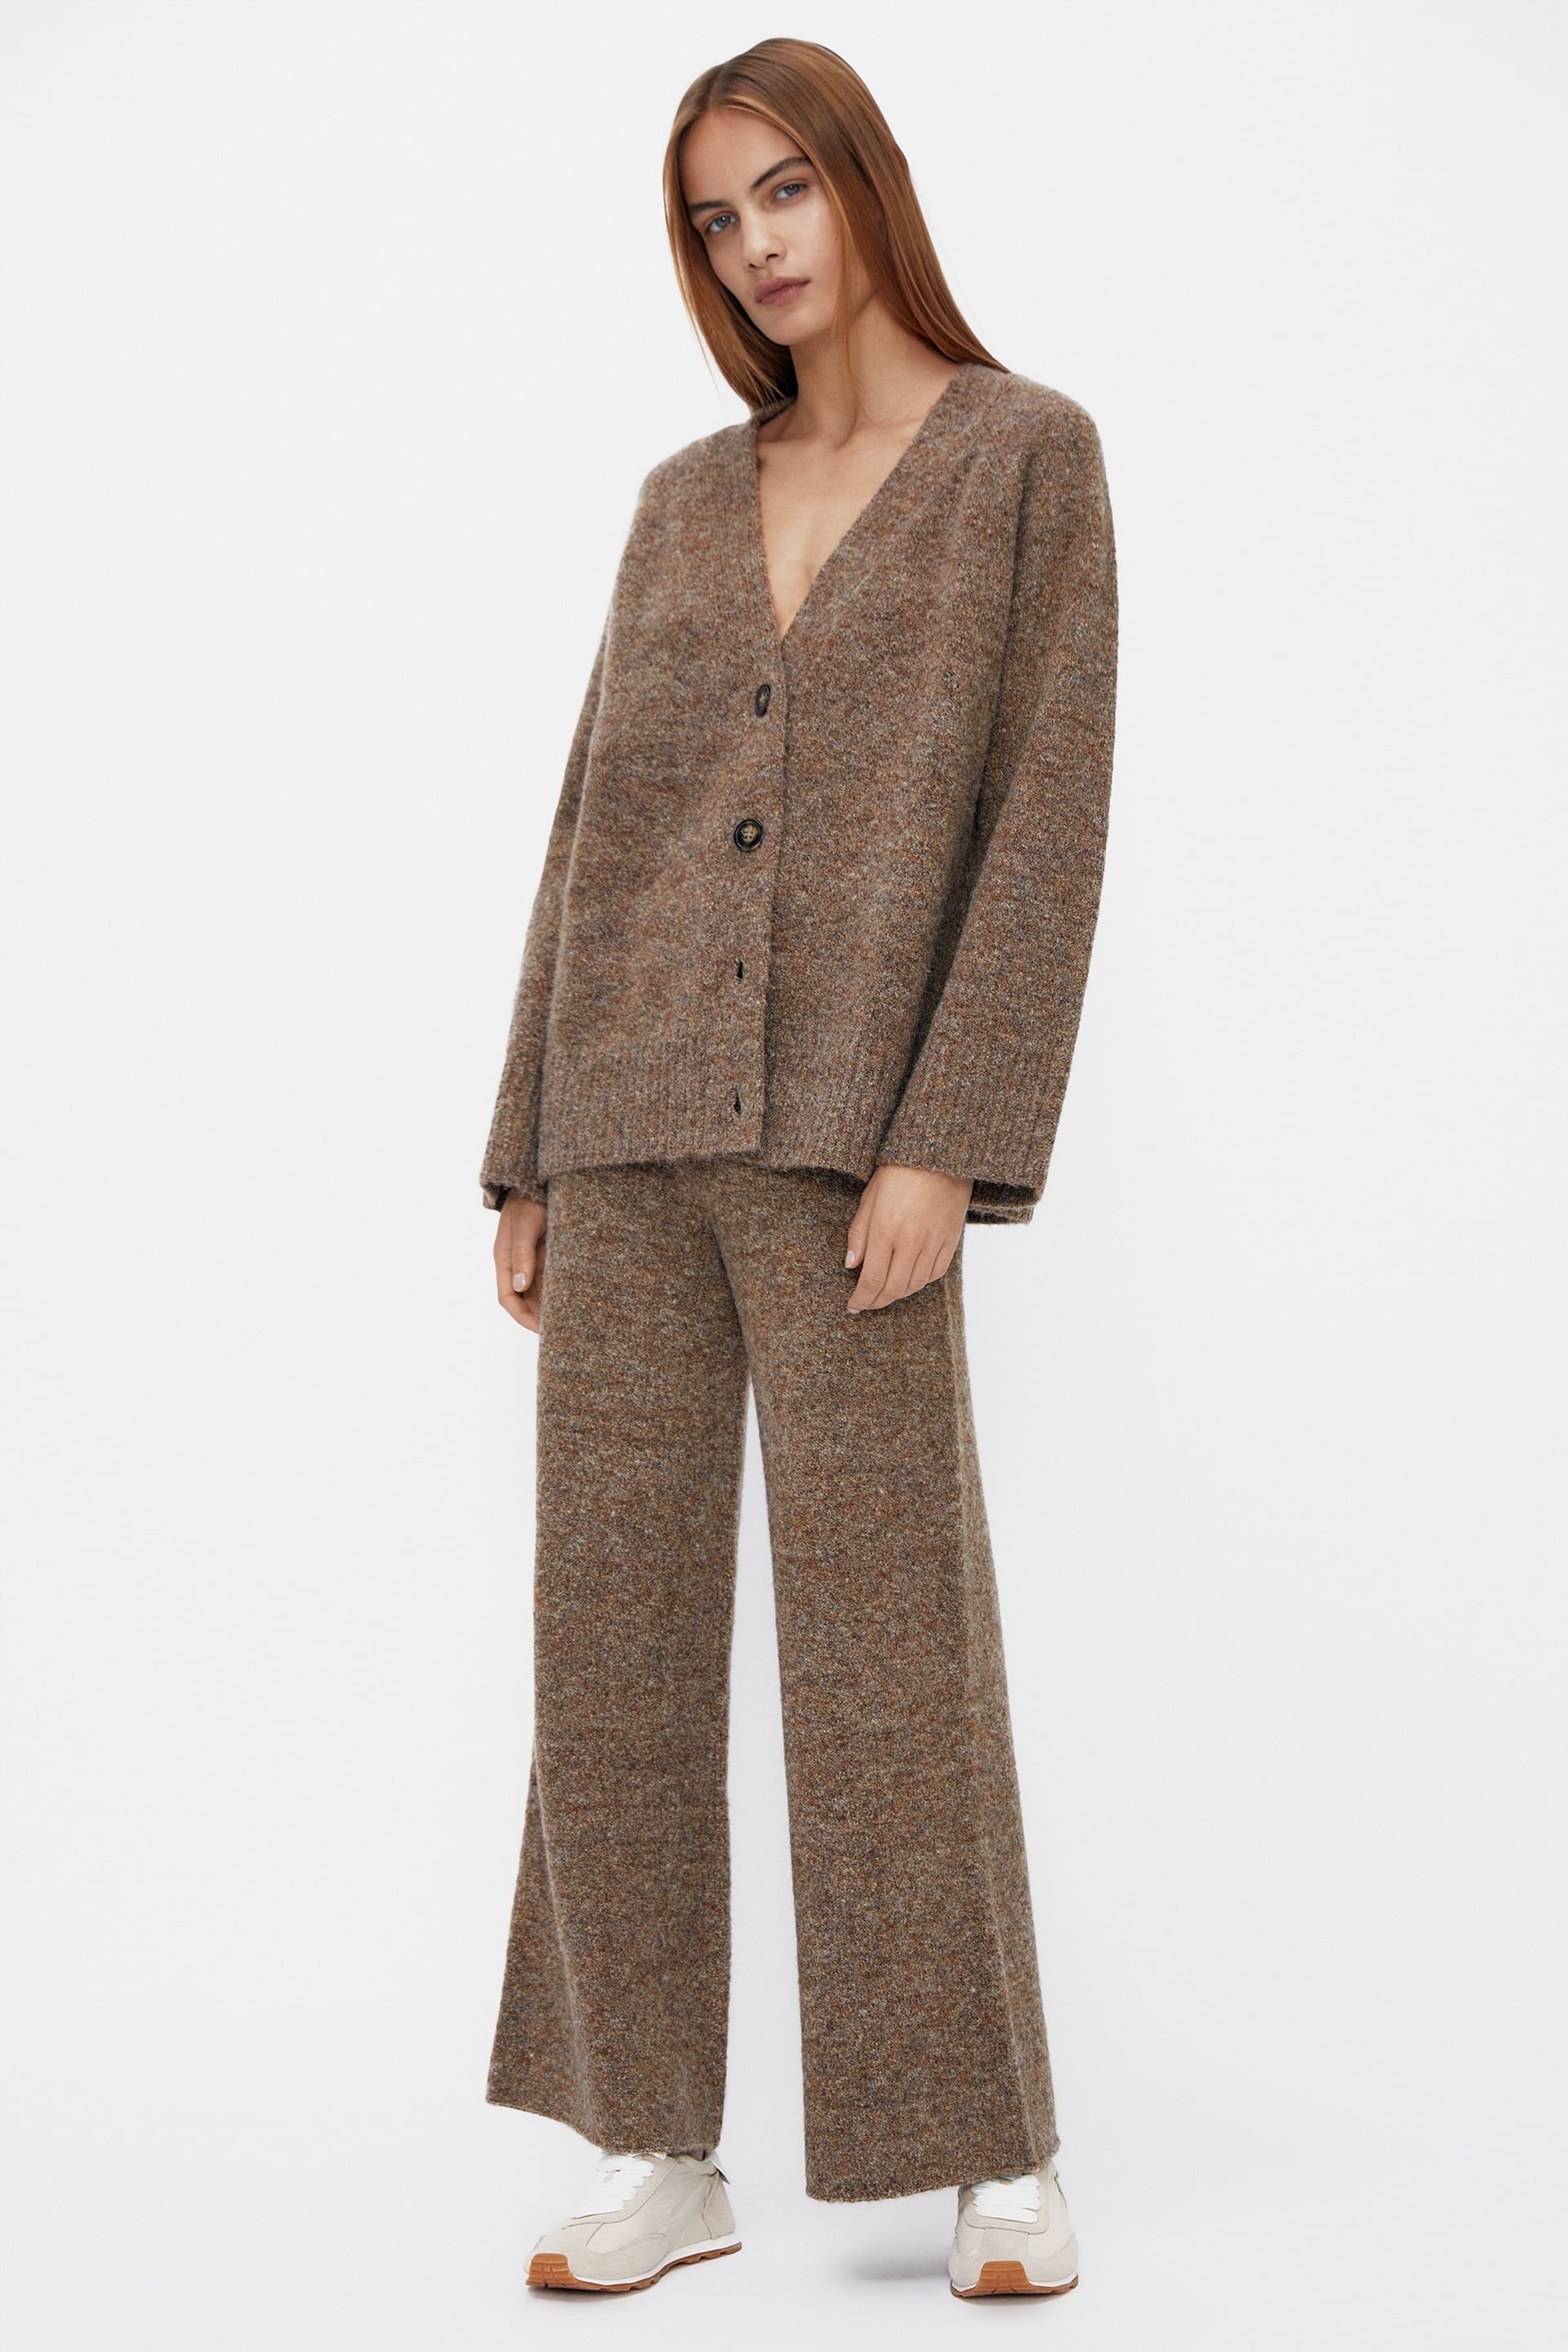 Zara’s Loungewear Section Is So Good I May Never Want to Wear Jeans Again